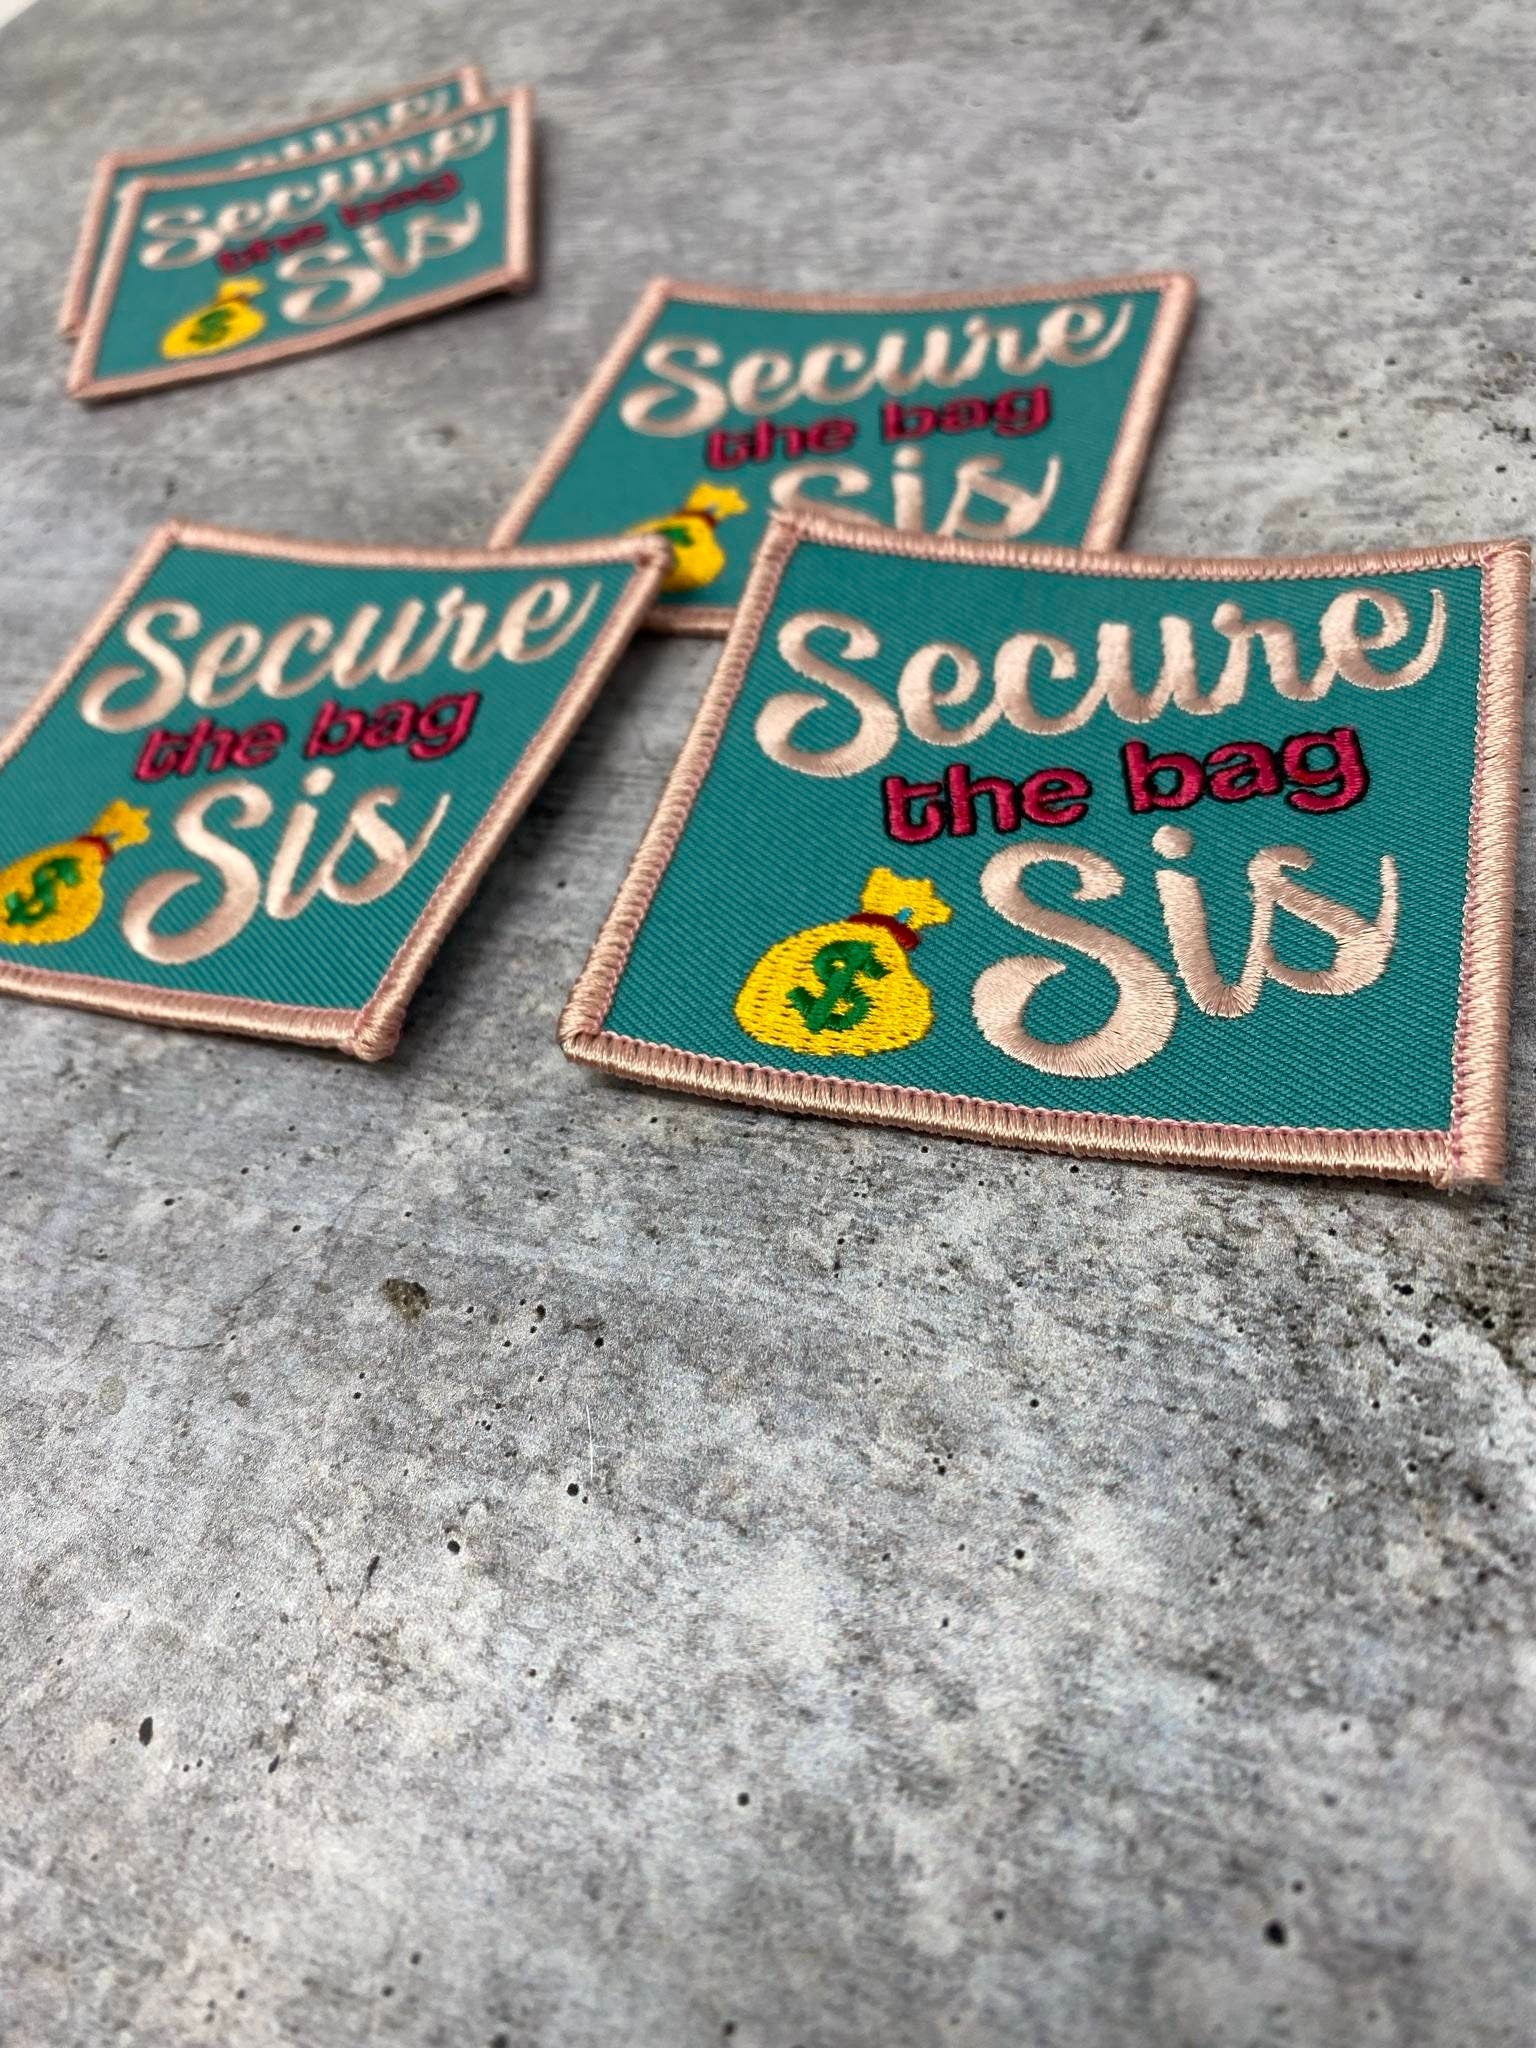 New, "Secure the Bag, sis", Light Pink Border, Iron-on Embroidered Patch; Positive Vibes; Feminists, Girl Power Patch, Size 3"x3"